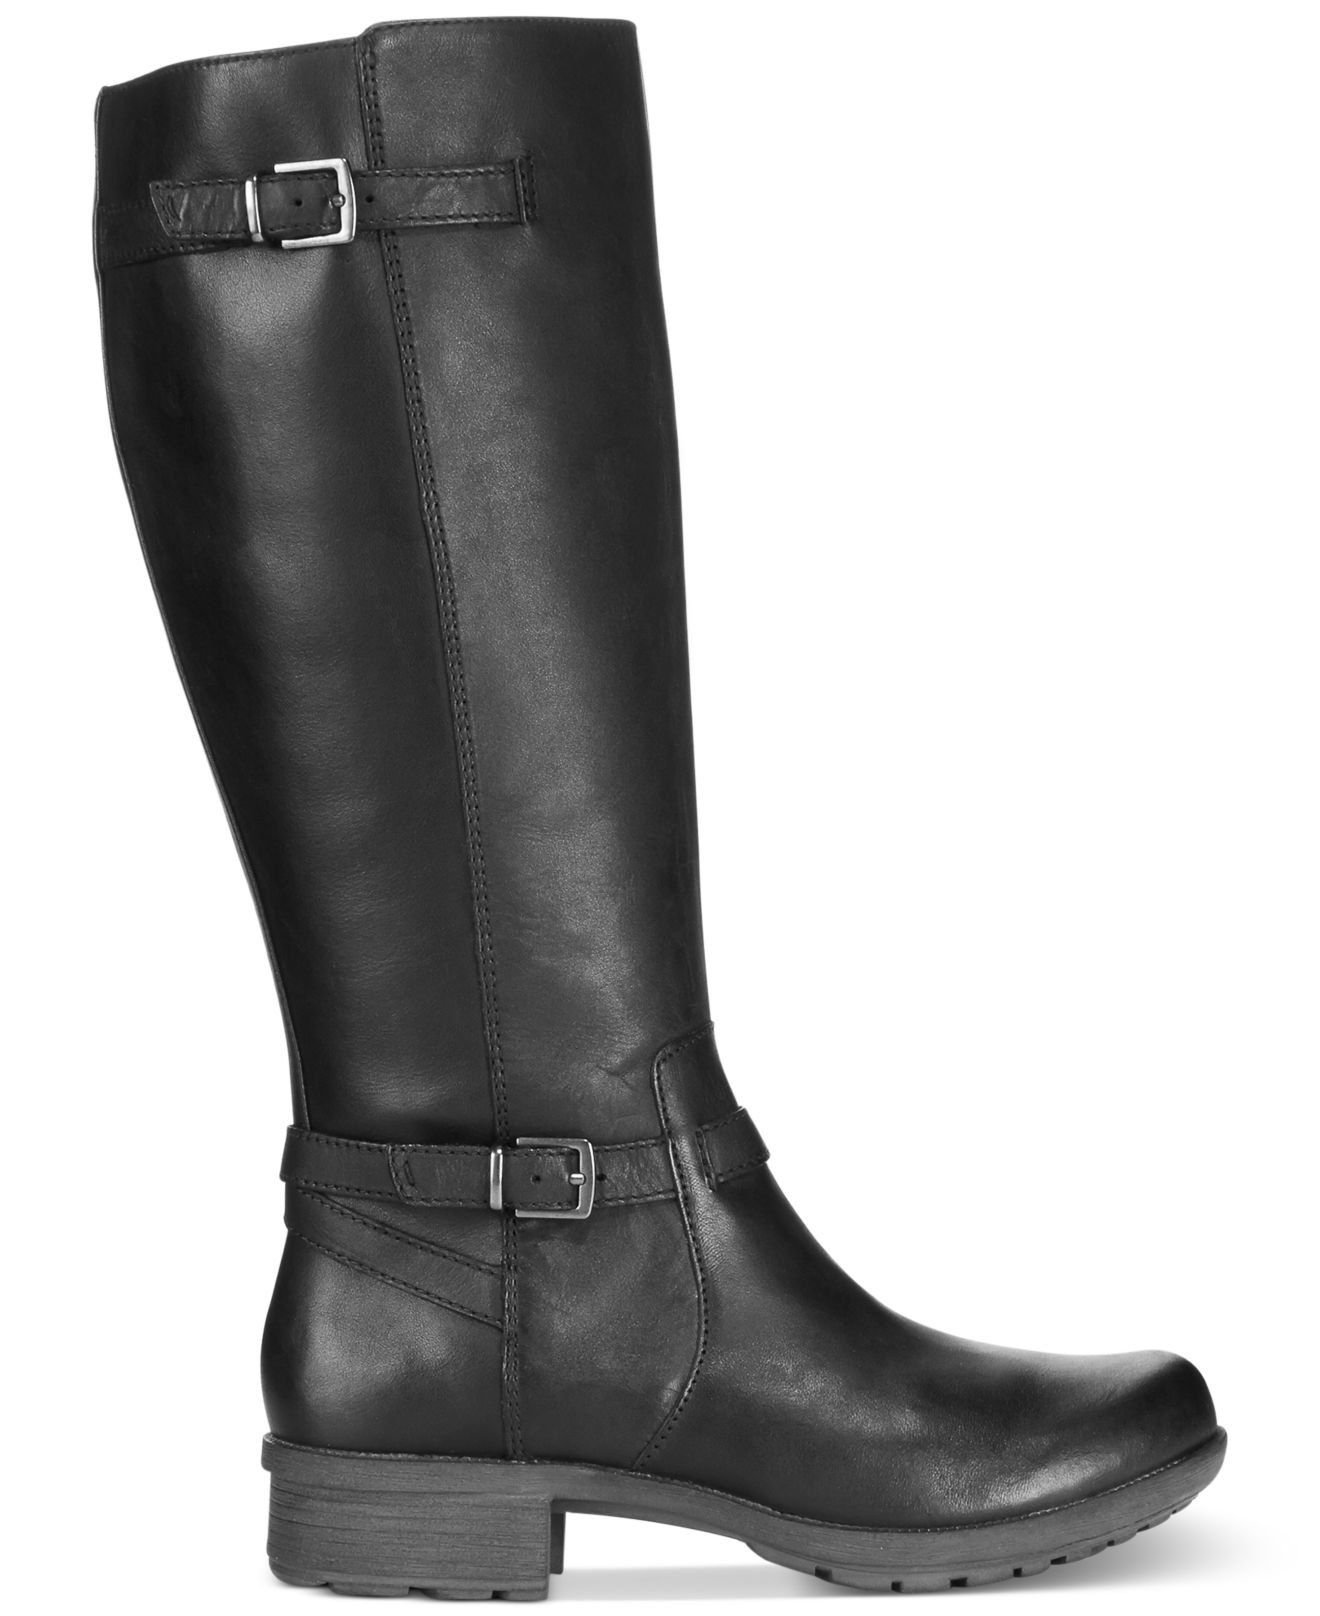 Clarks Collections Womens Riddle Array Tall Boots in Black - Lyst